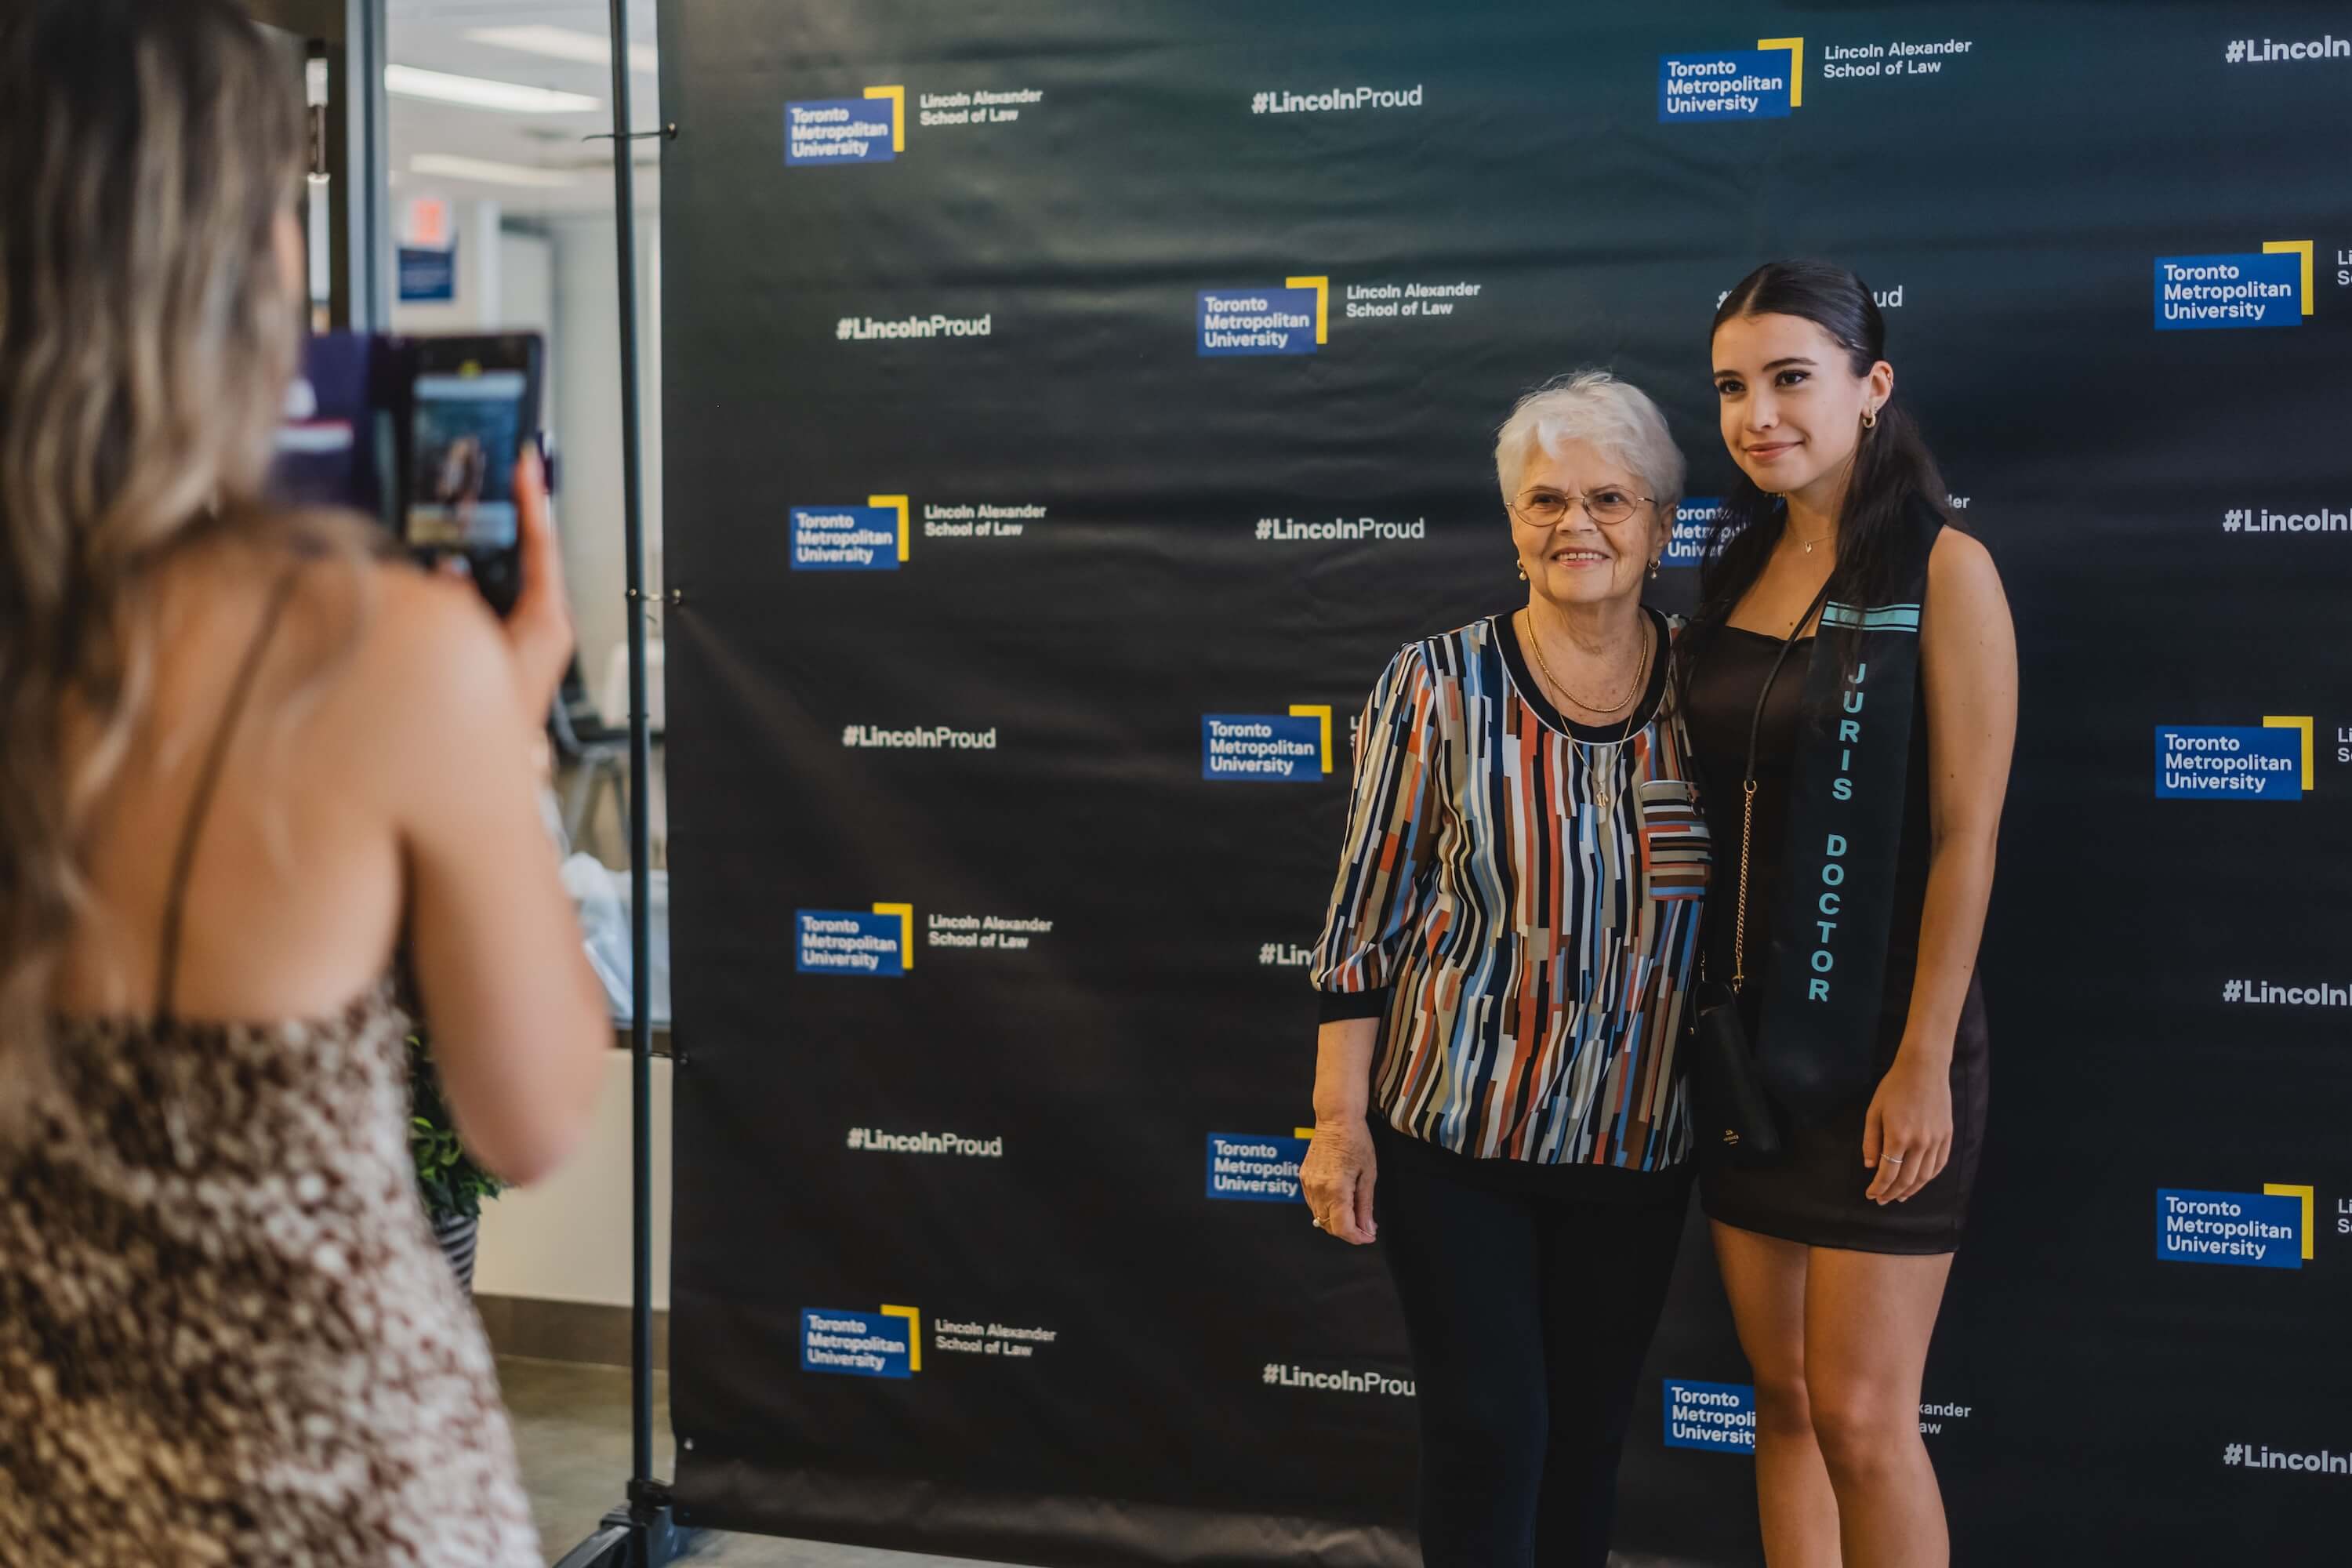 An older woman and a young woman posing in front of a backdrop while a young woman takes their photo.